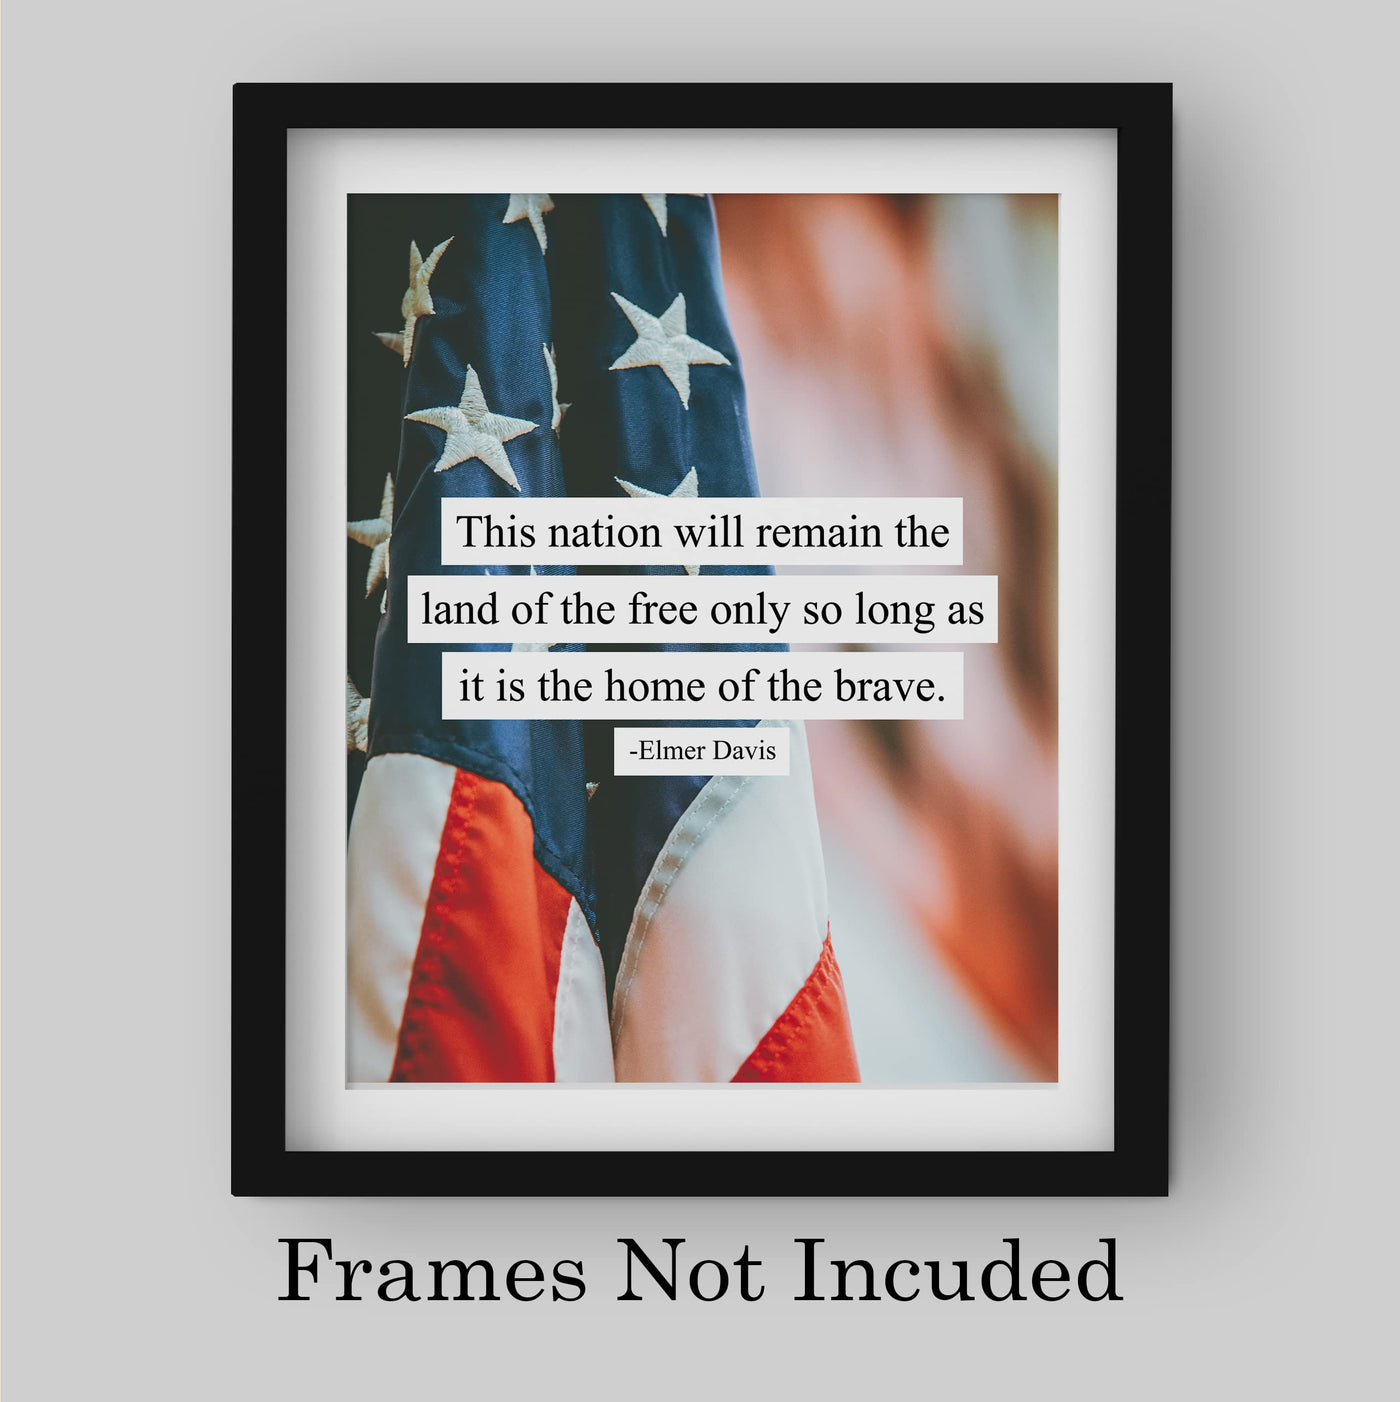 This Nation Will Remain the Land of the Free- American Flag Wall Art -8x10" Patriotic USA Pride Print -Ready to Frame. Home-Office-Bar-Cave Decor! Great Gift for Military-Veterans & All Patriots!